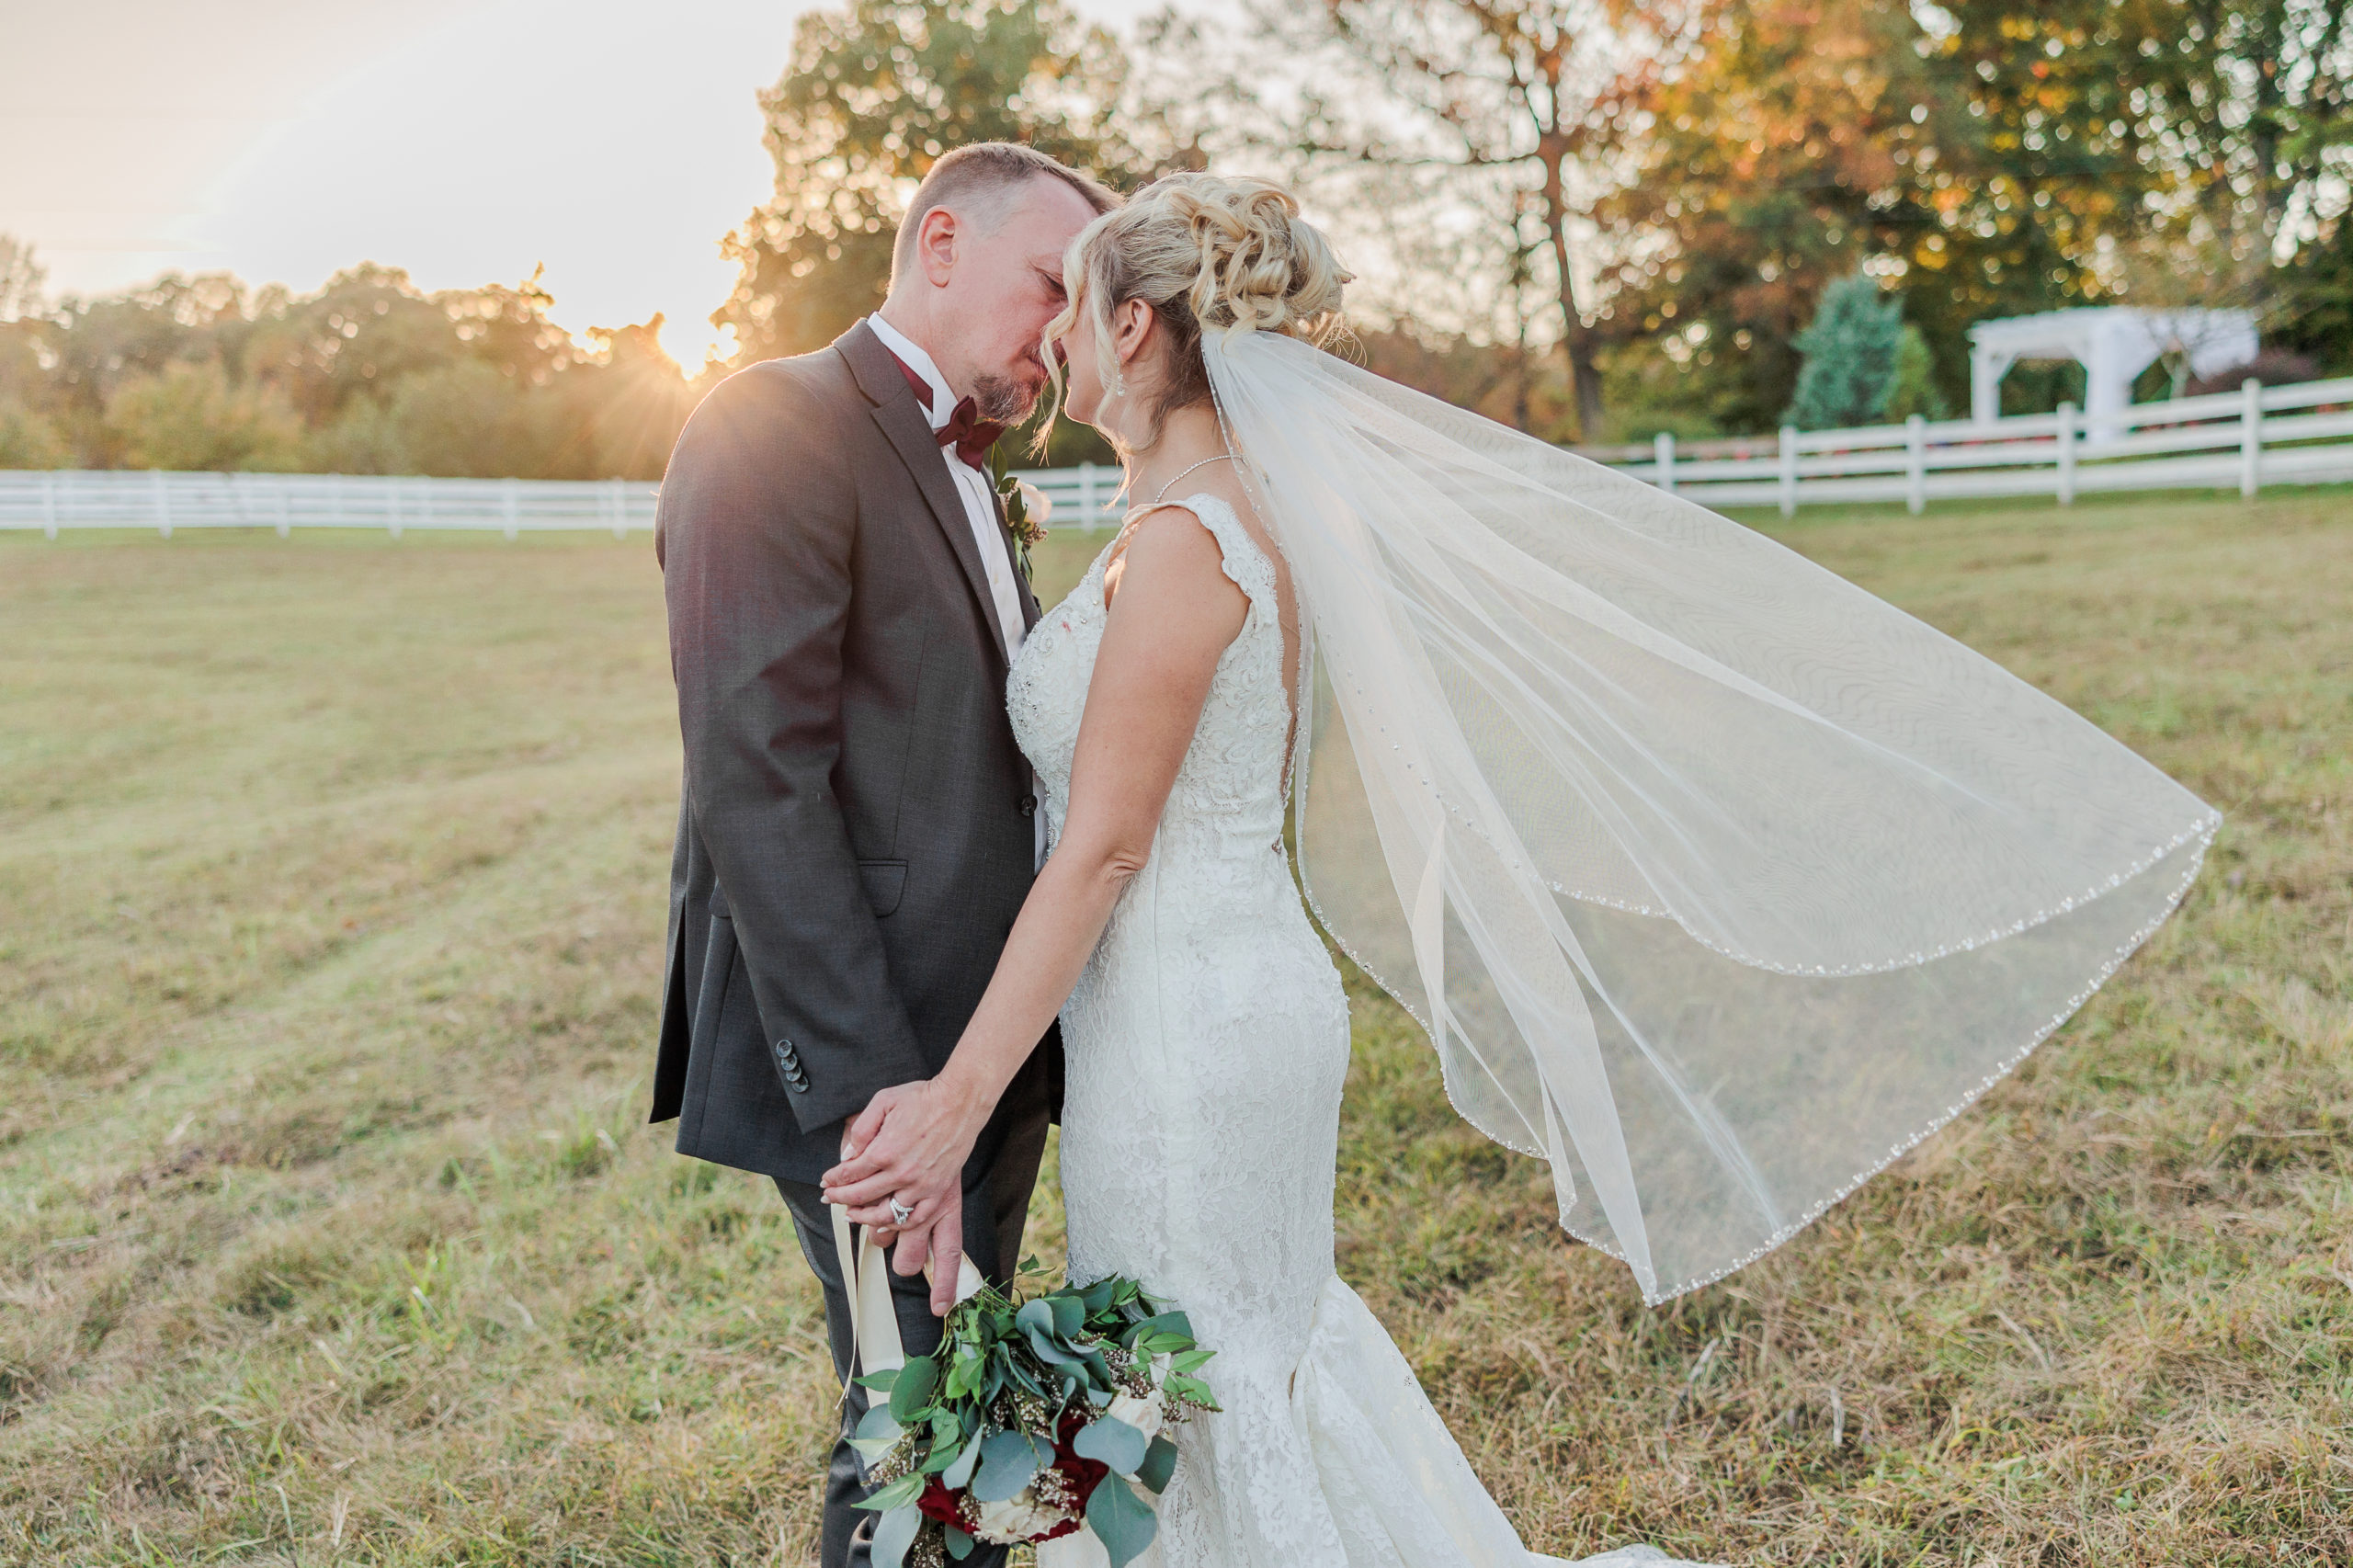 Michelle and Micah's Fall wedding at dewberry farm nc